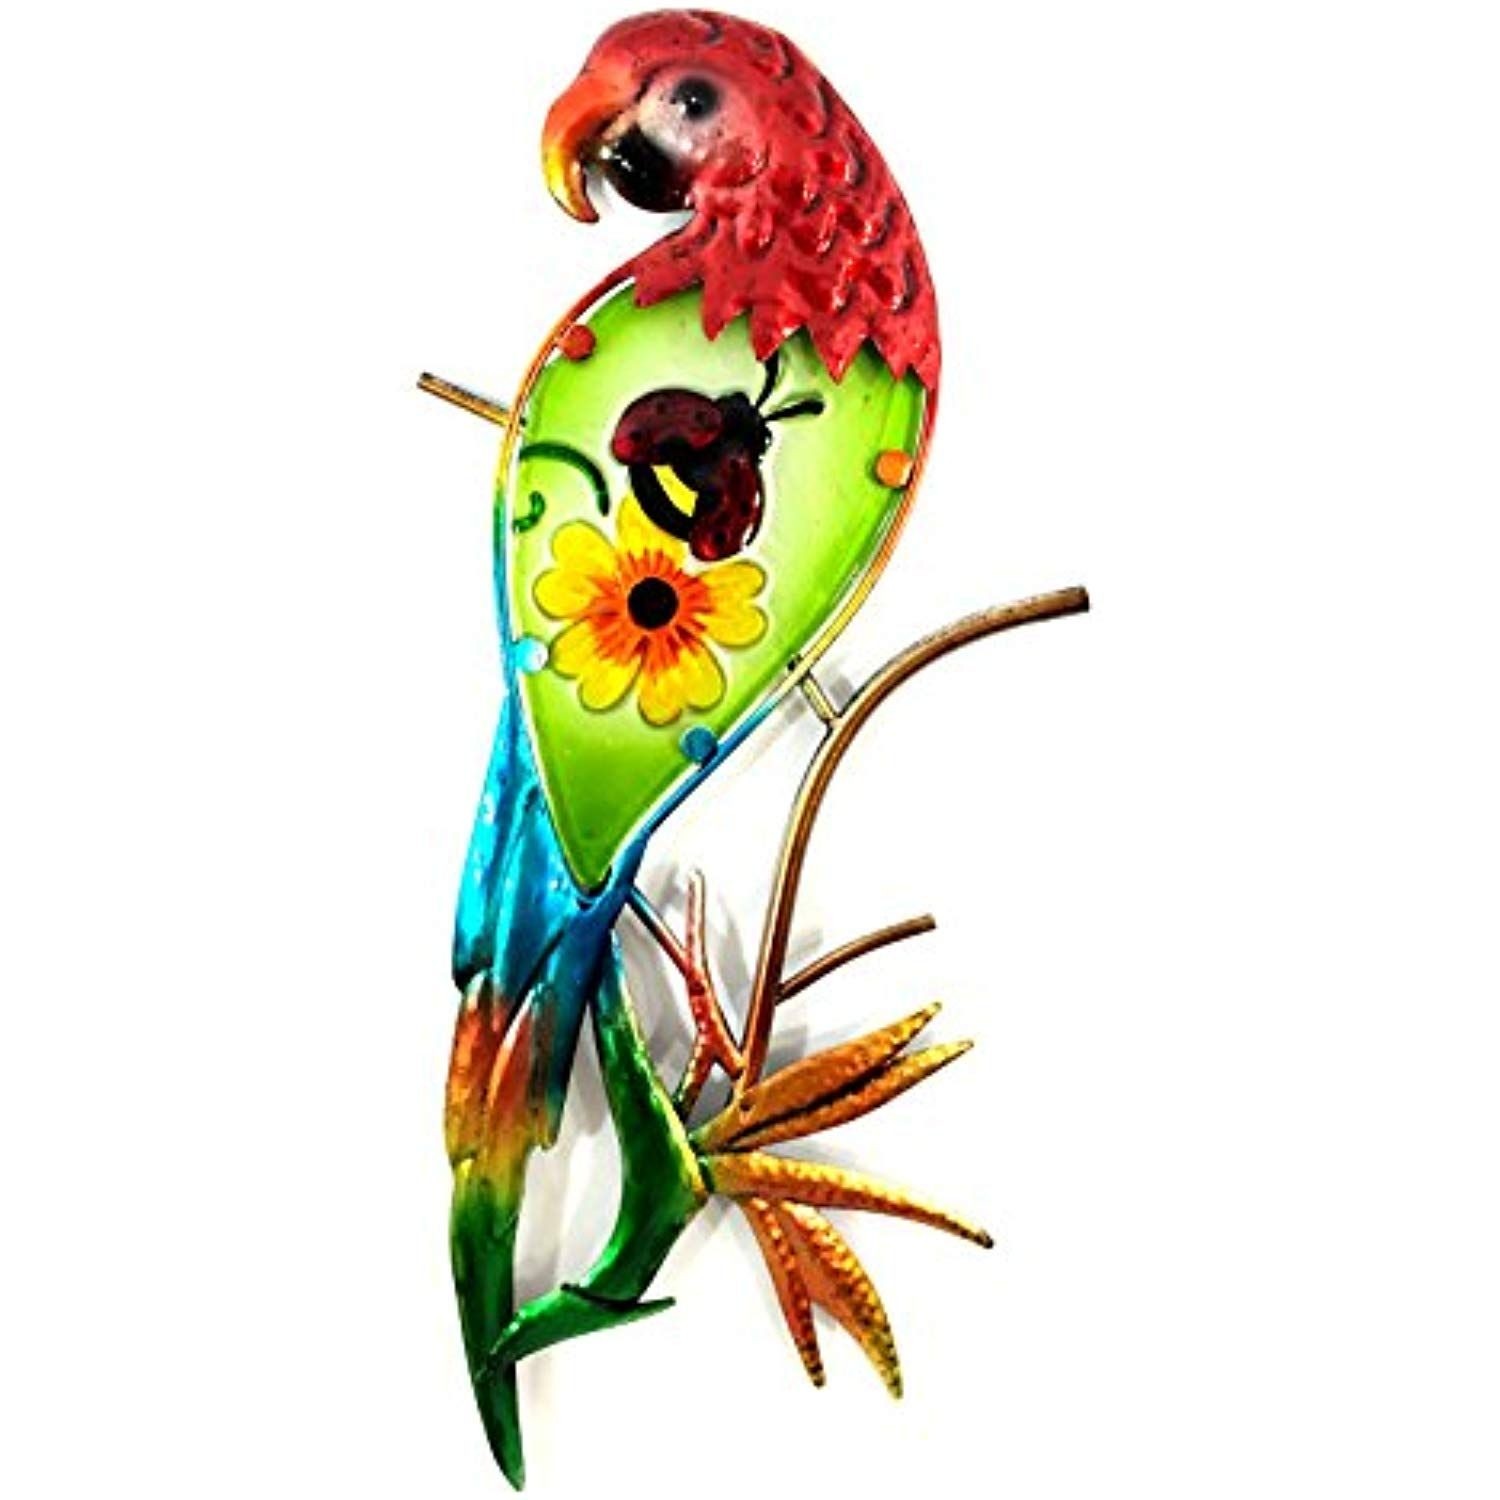 Bejeweled Display® Parrot w/ Glass Wall Art Plaque & Home Decor